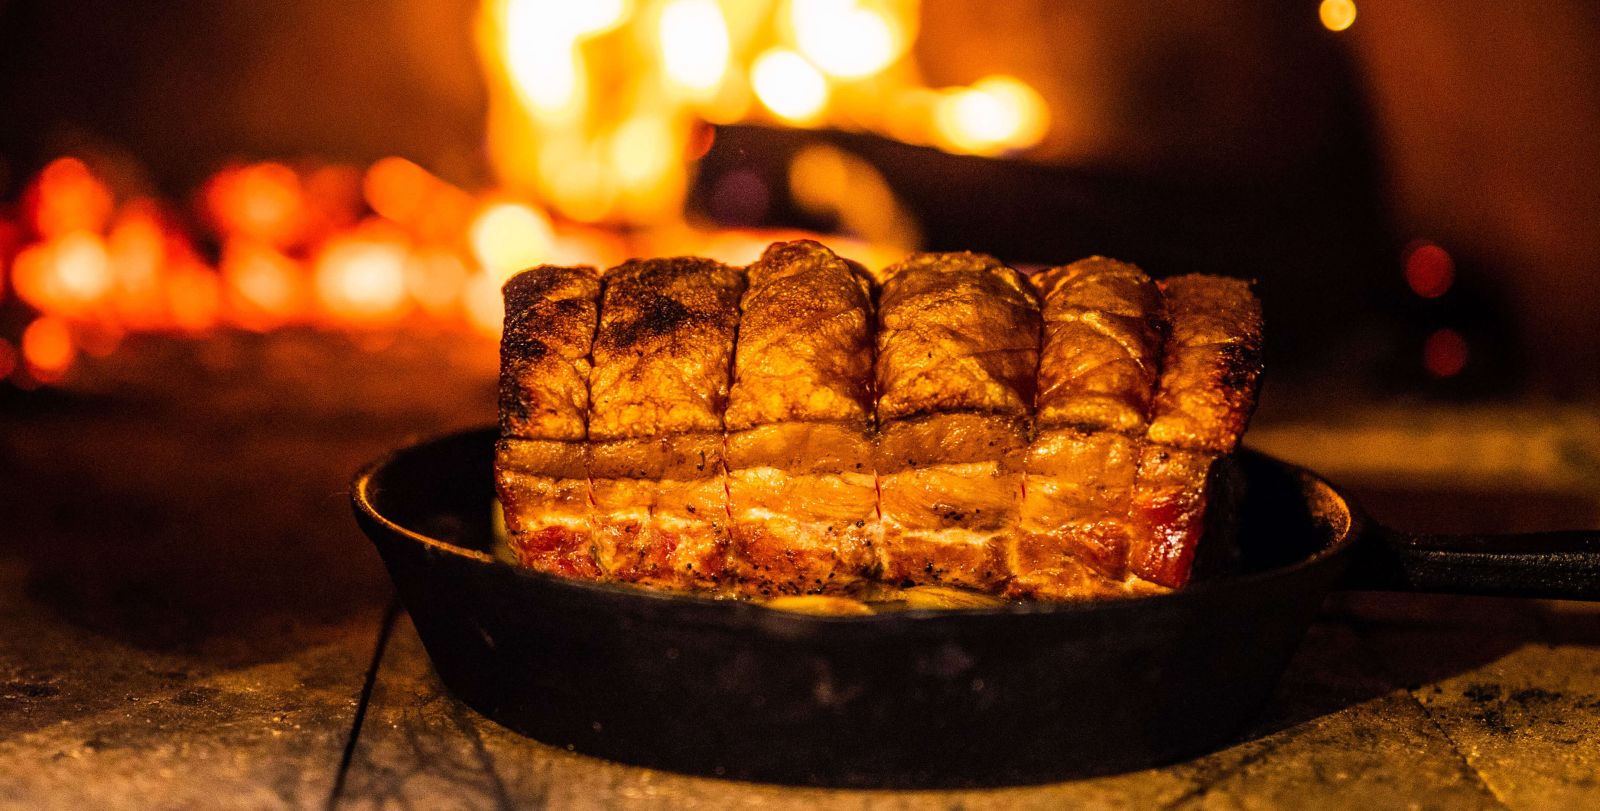 This image shows delicious pork cooked in the Wood Fired Pizza Oven